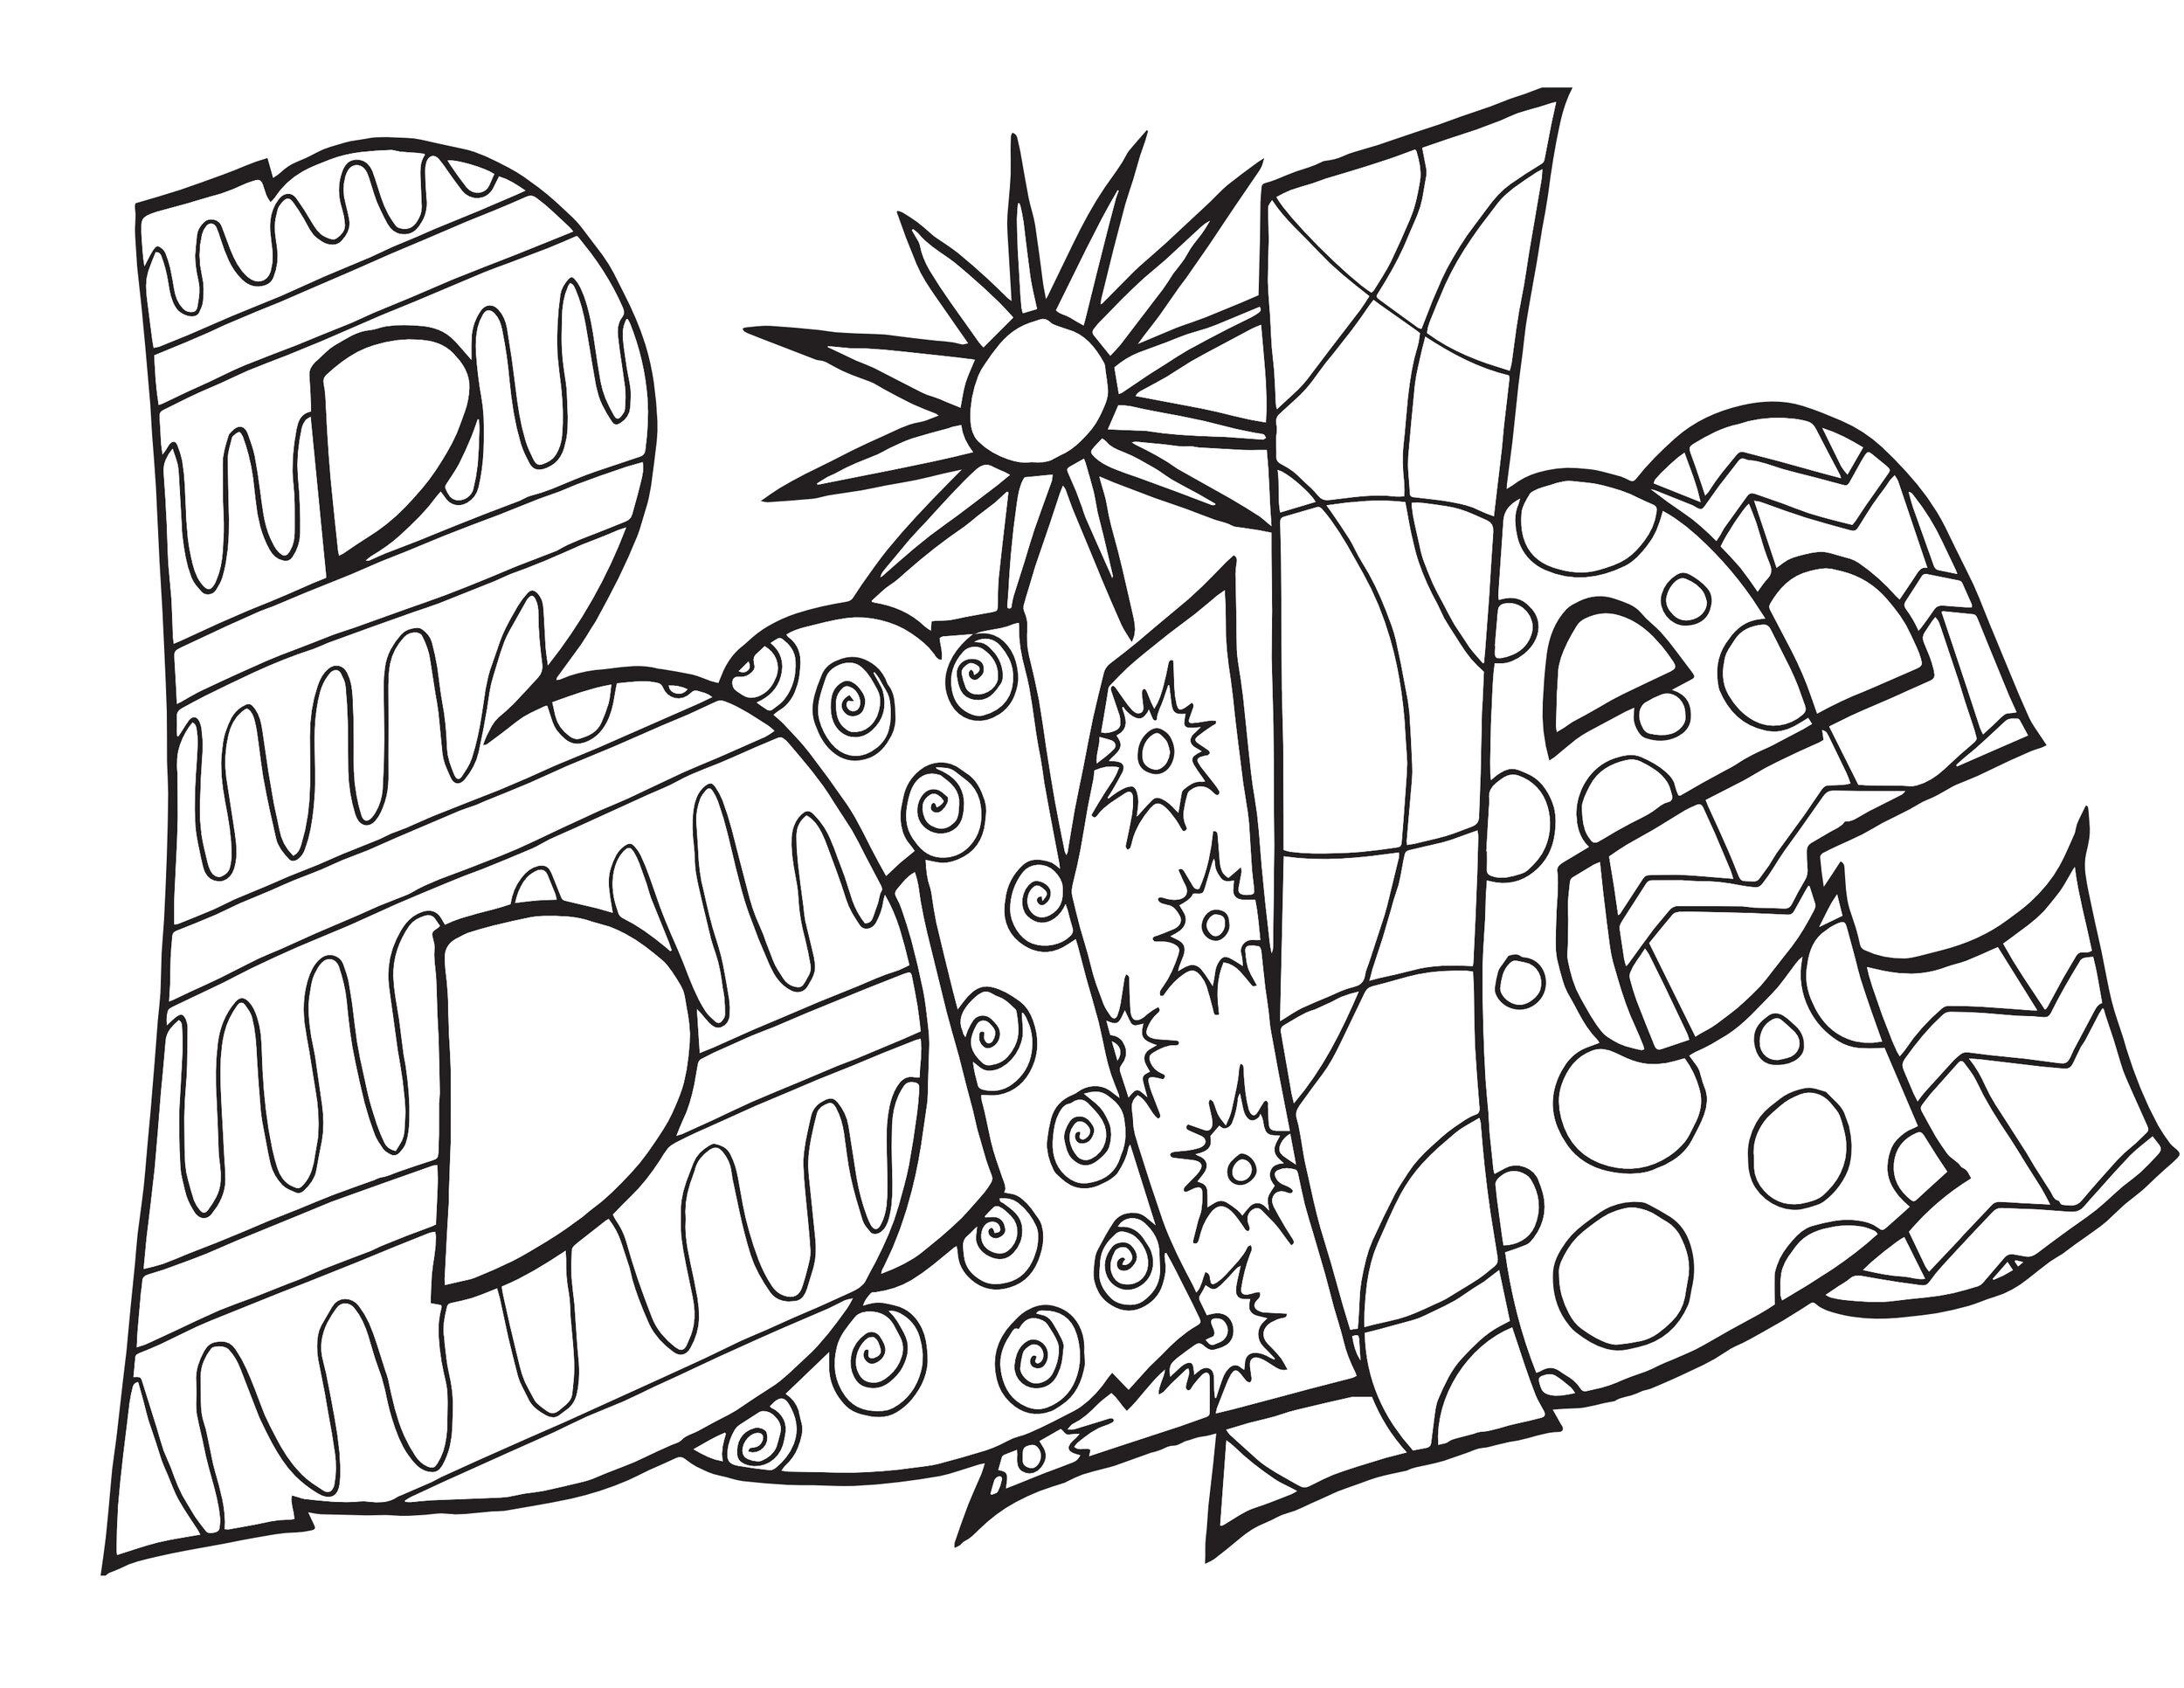 BAILEE - a free coloring page from Stevie doodles